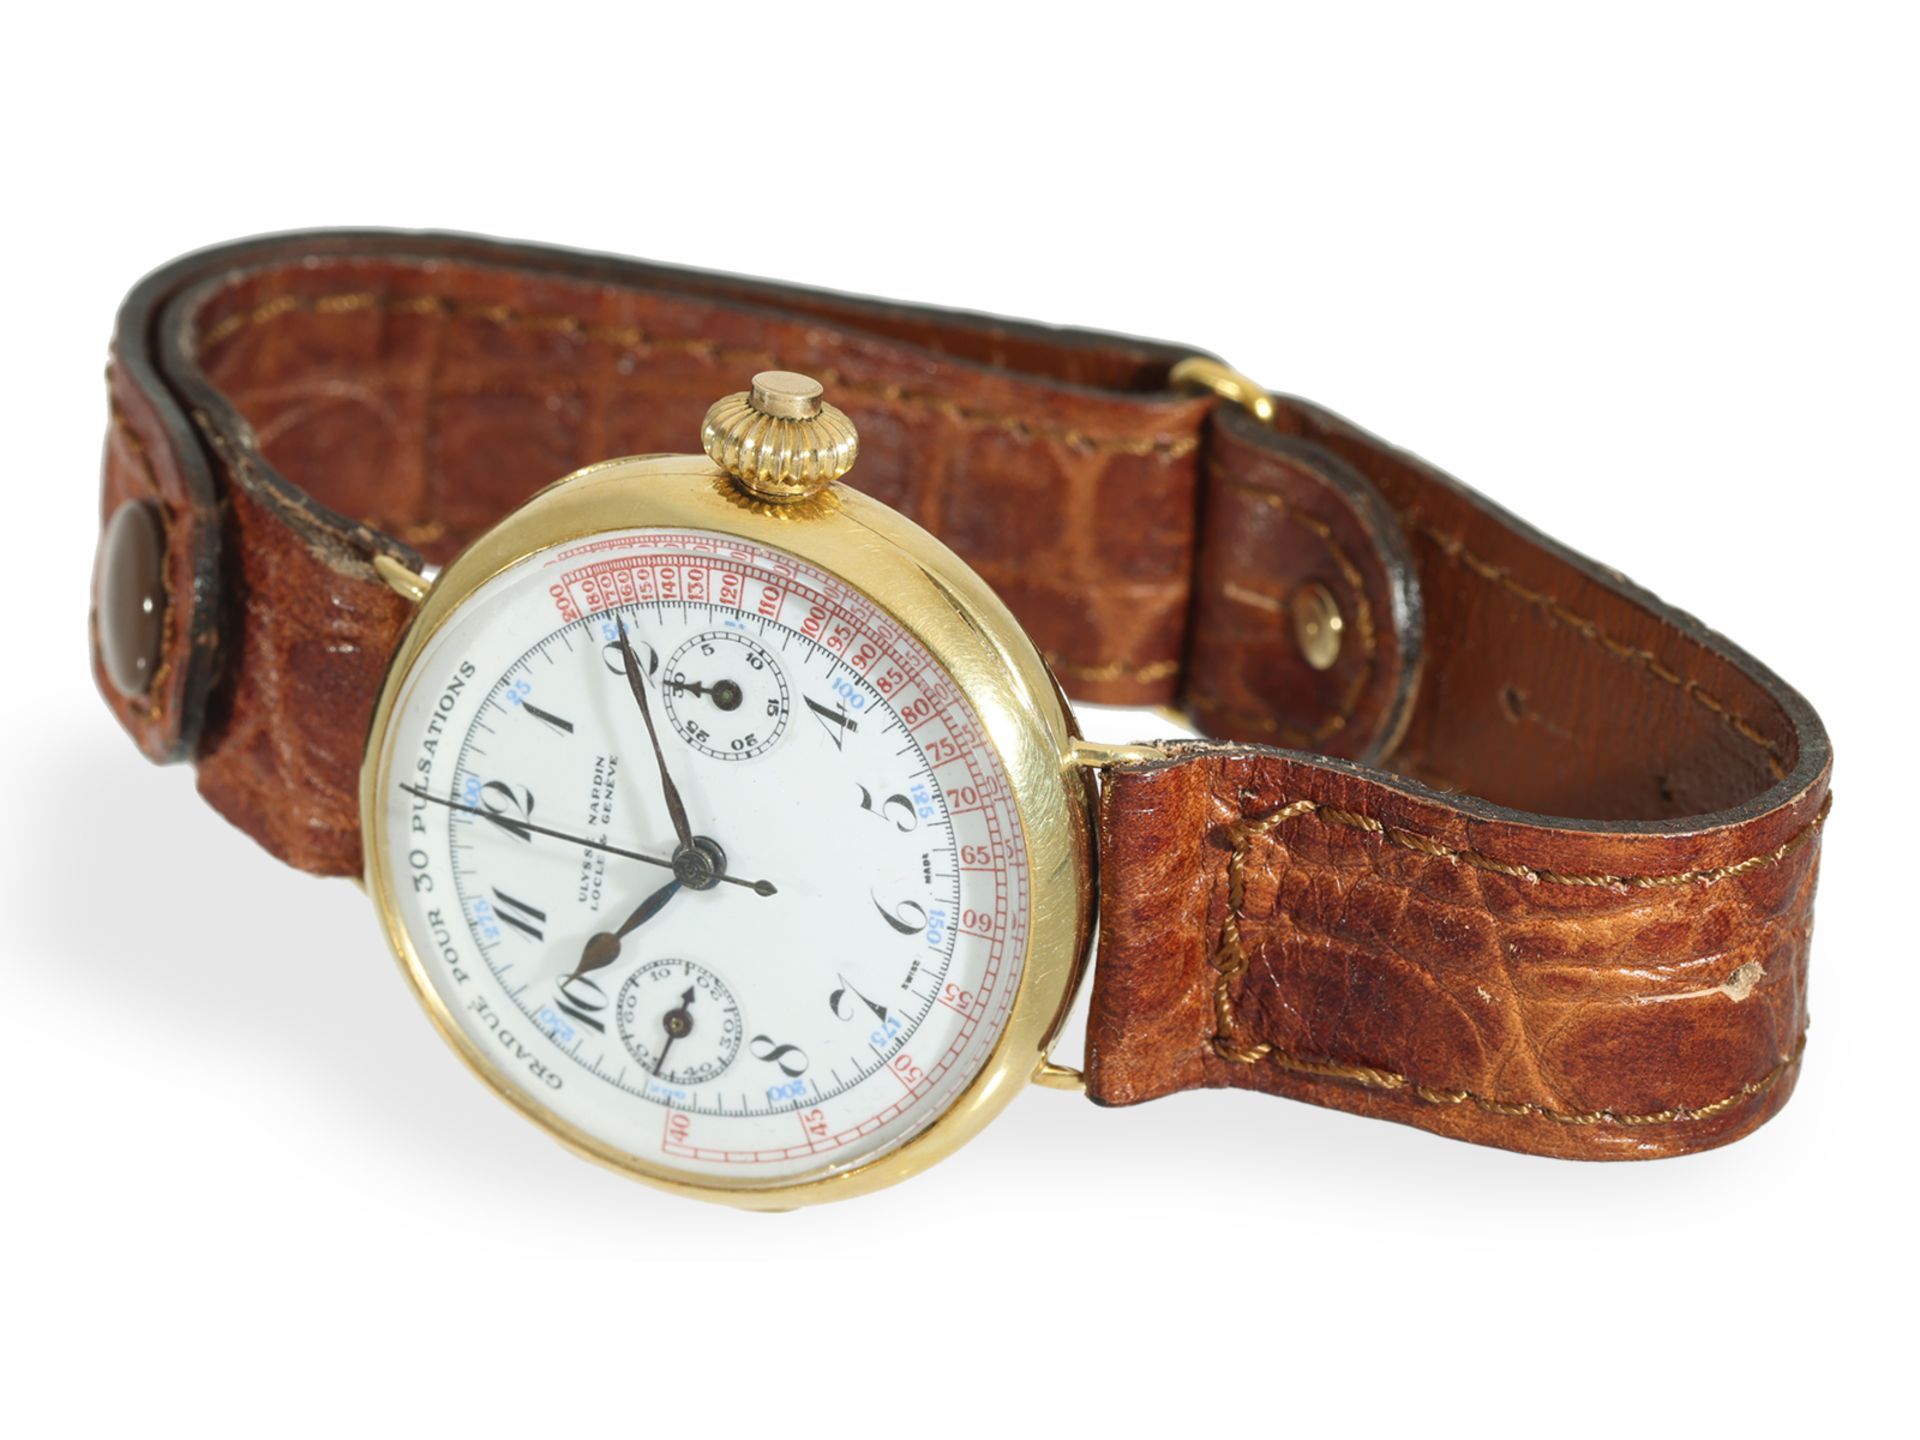 Wristwatch: rarity, one of the first Ulysse Nardin chronographs from around 1920, with original box  - Image 2 of 9